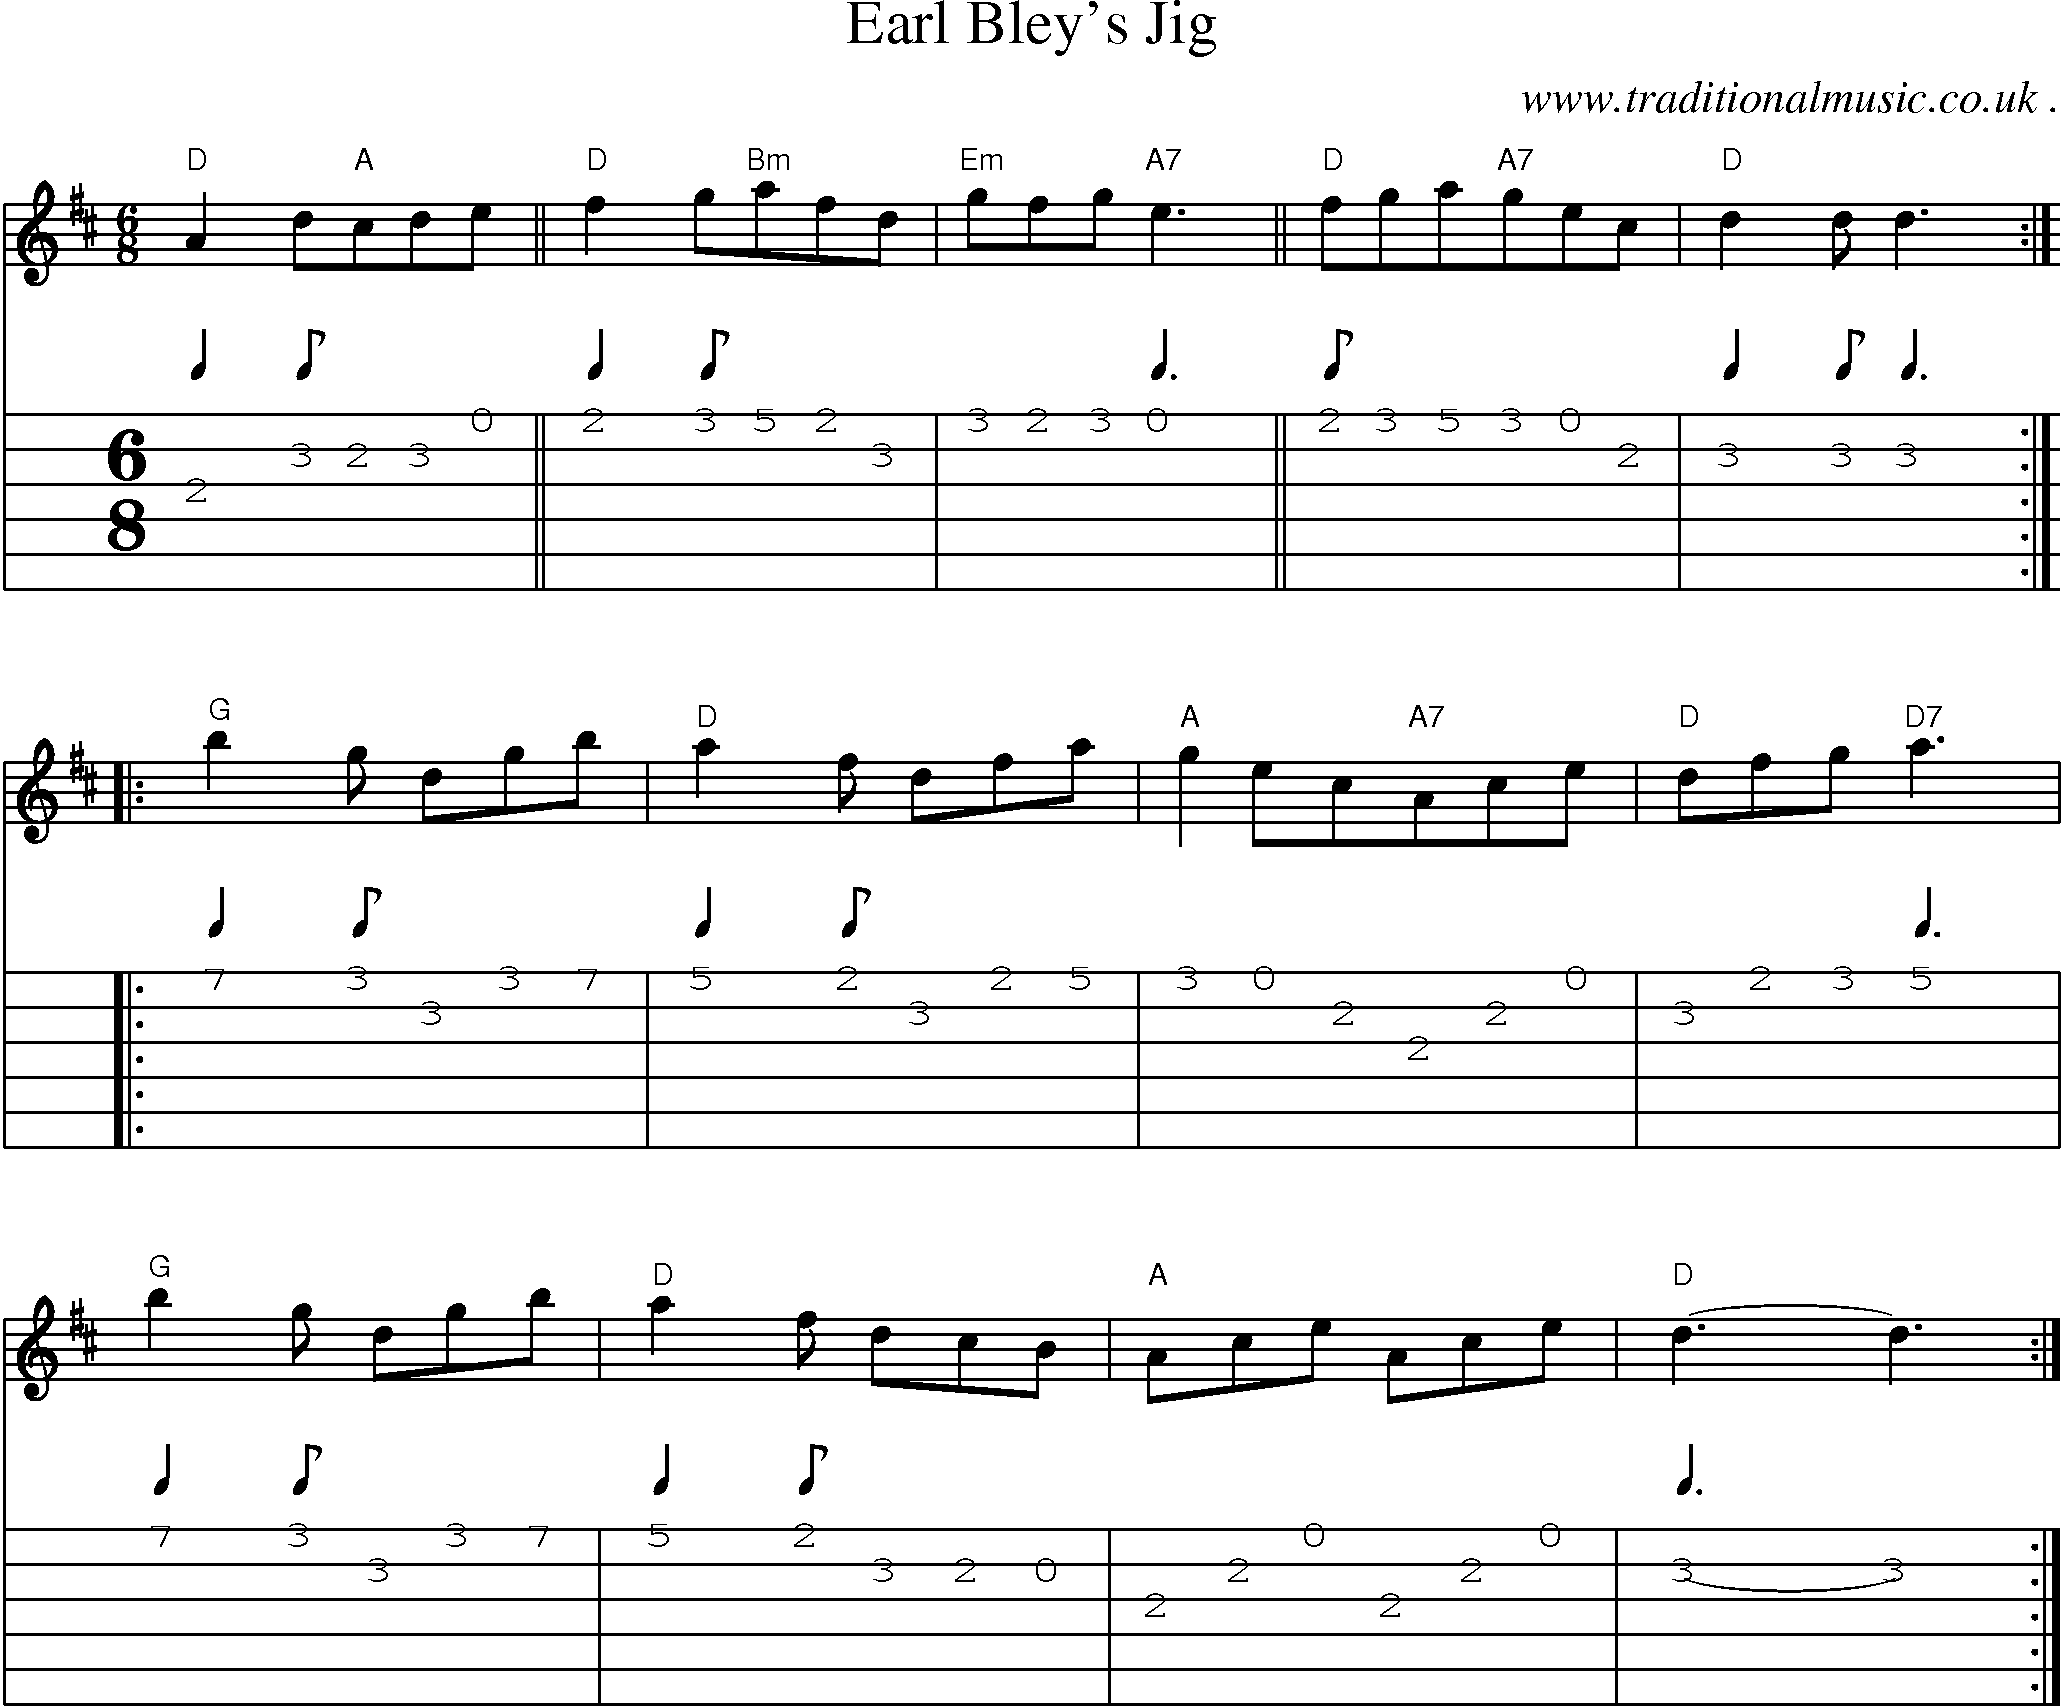 Sheet-Music and Guitar Tabs for Earl Bleys Jig